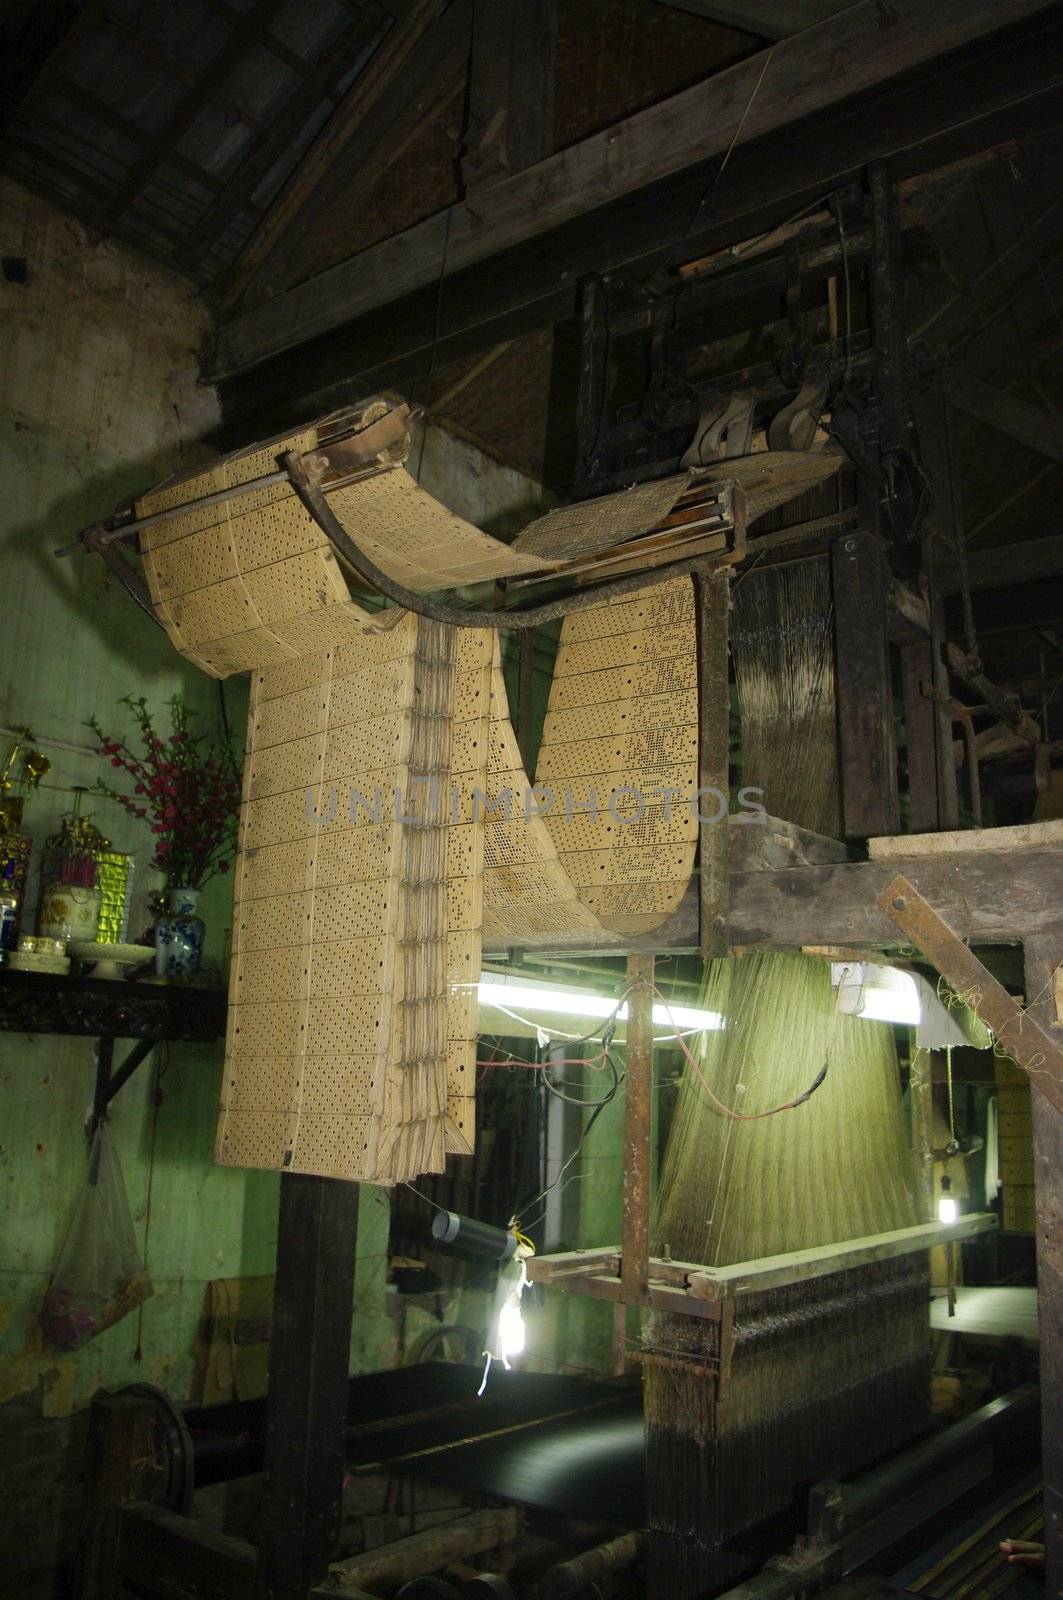 There are many weaving workshops in Asia. Many of these workshops weave silk. Weaving and making have not changed since the last century. The machines are still punched  vith card programming . The noise is infernal workshops